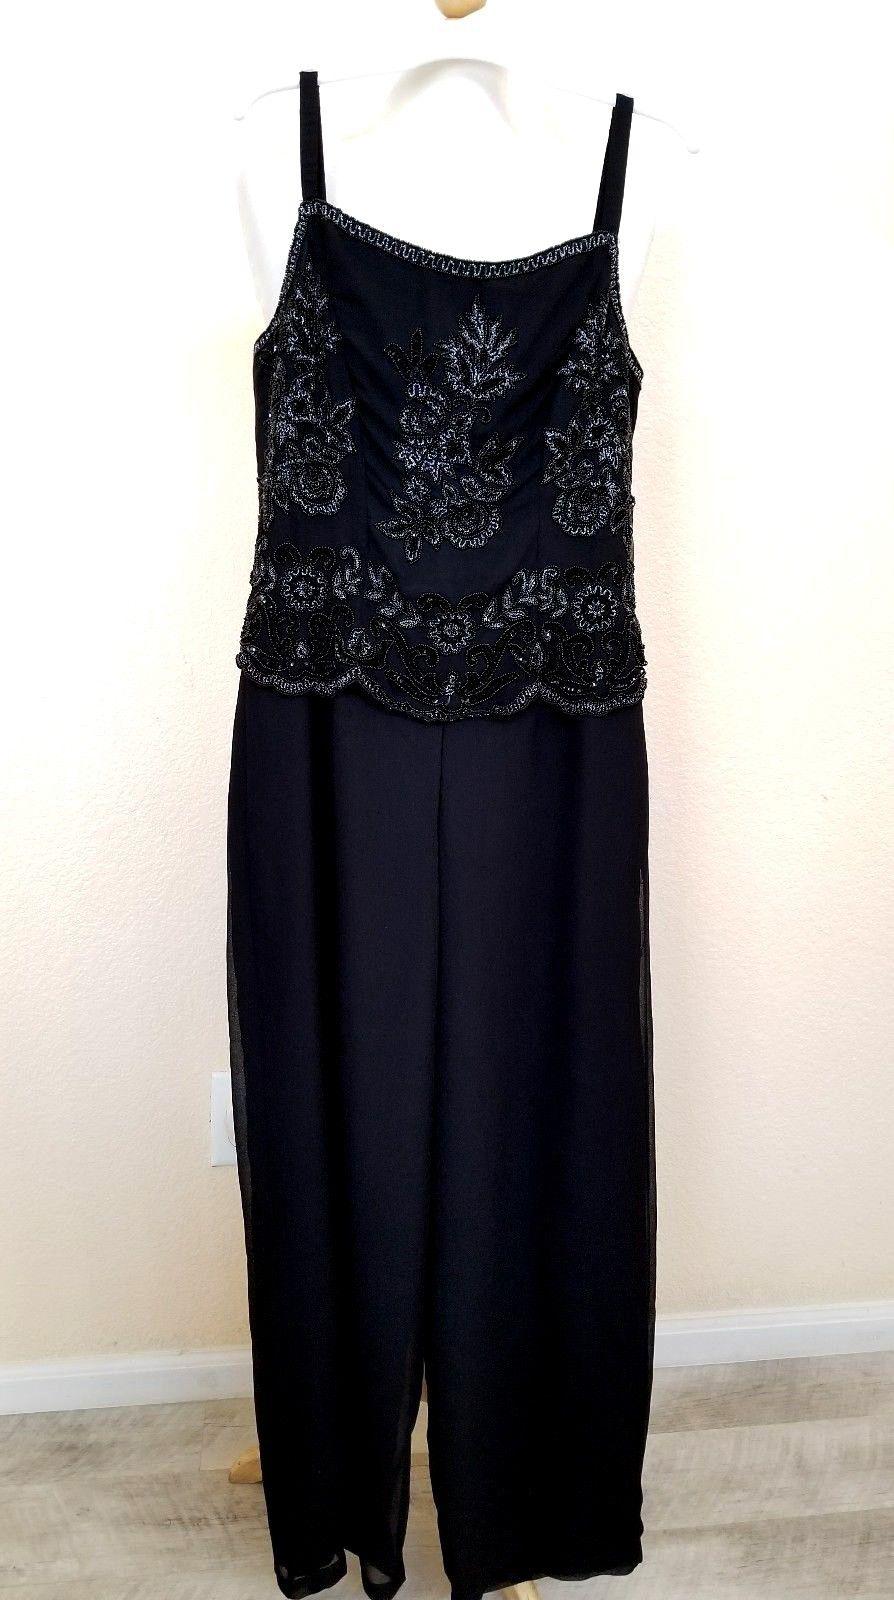 Styleworks Women's Black Romper Jumpsuit Gown size 4 Tiered Beaded